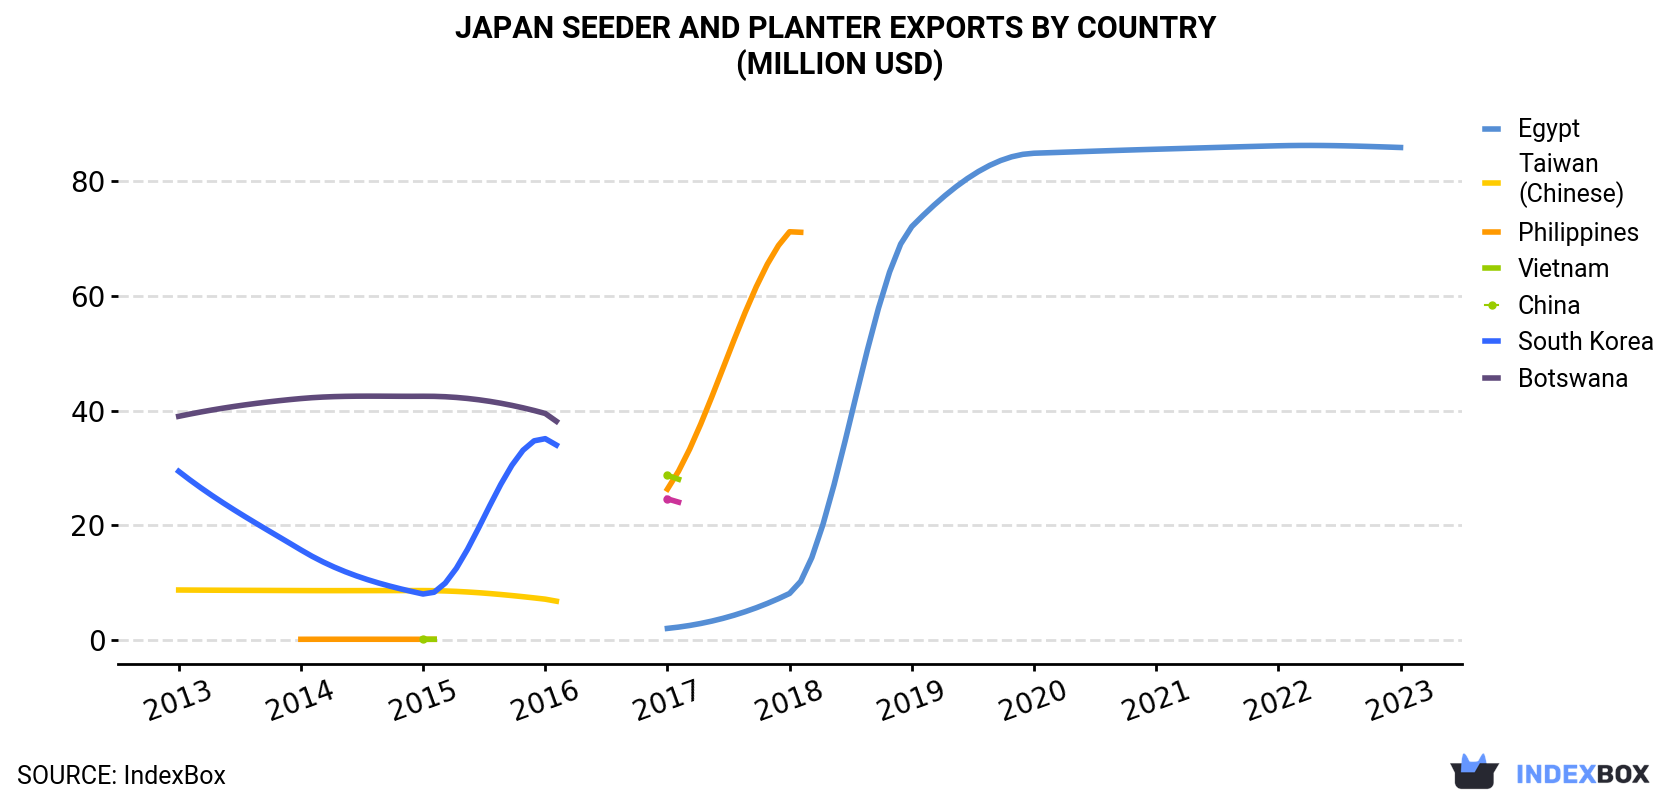 Japan Seeder And Planter Exports By Country (Million USD)